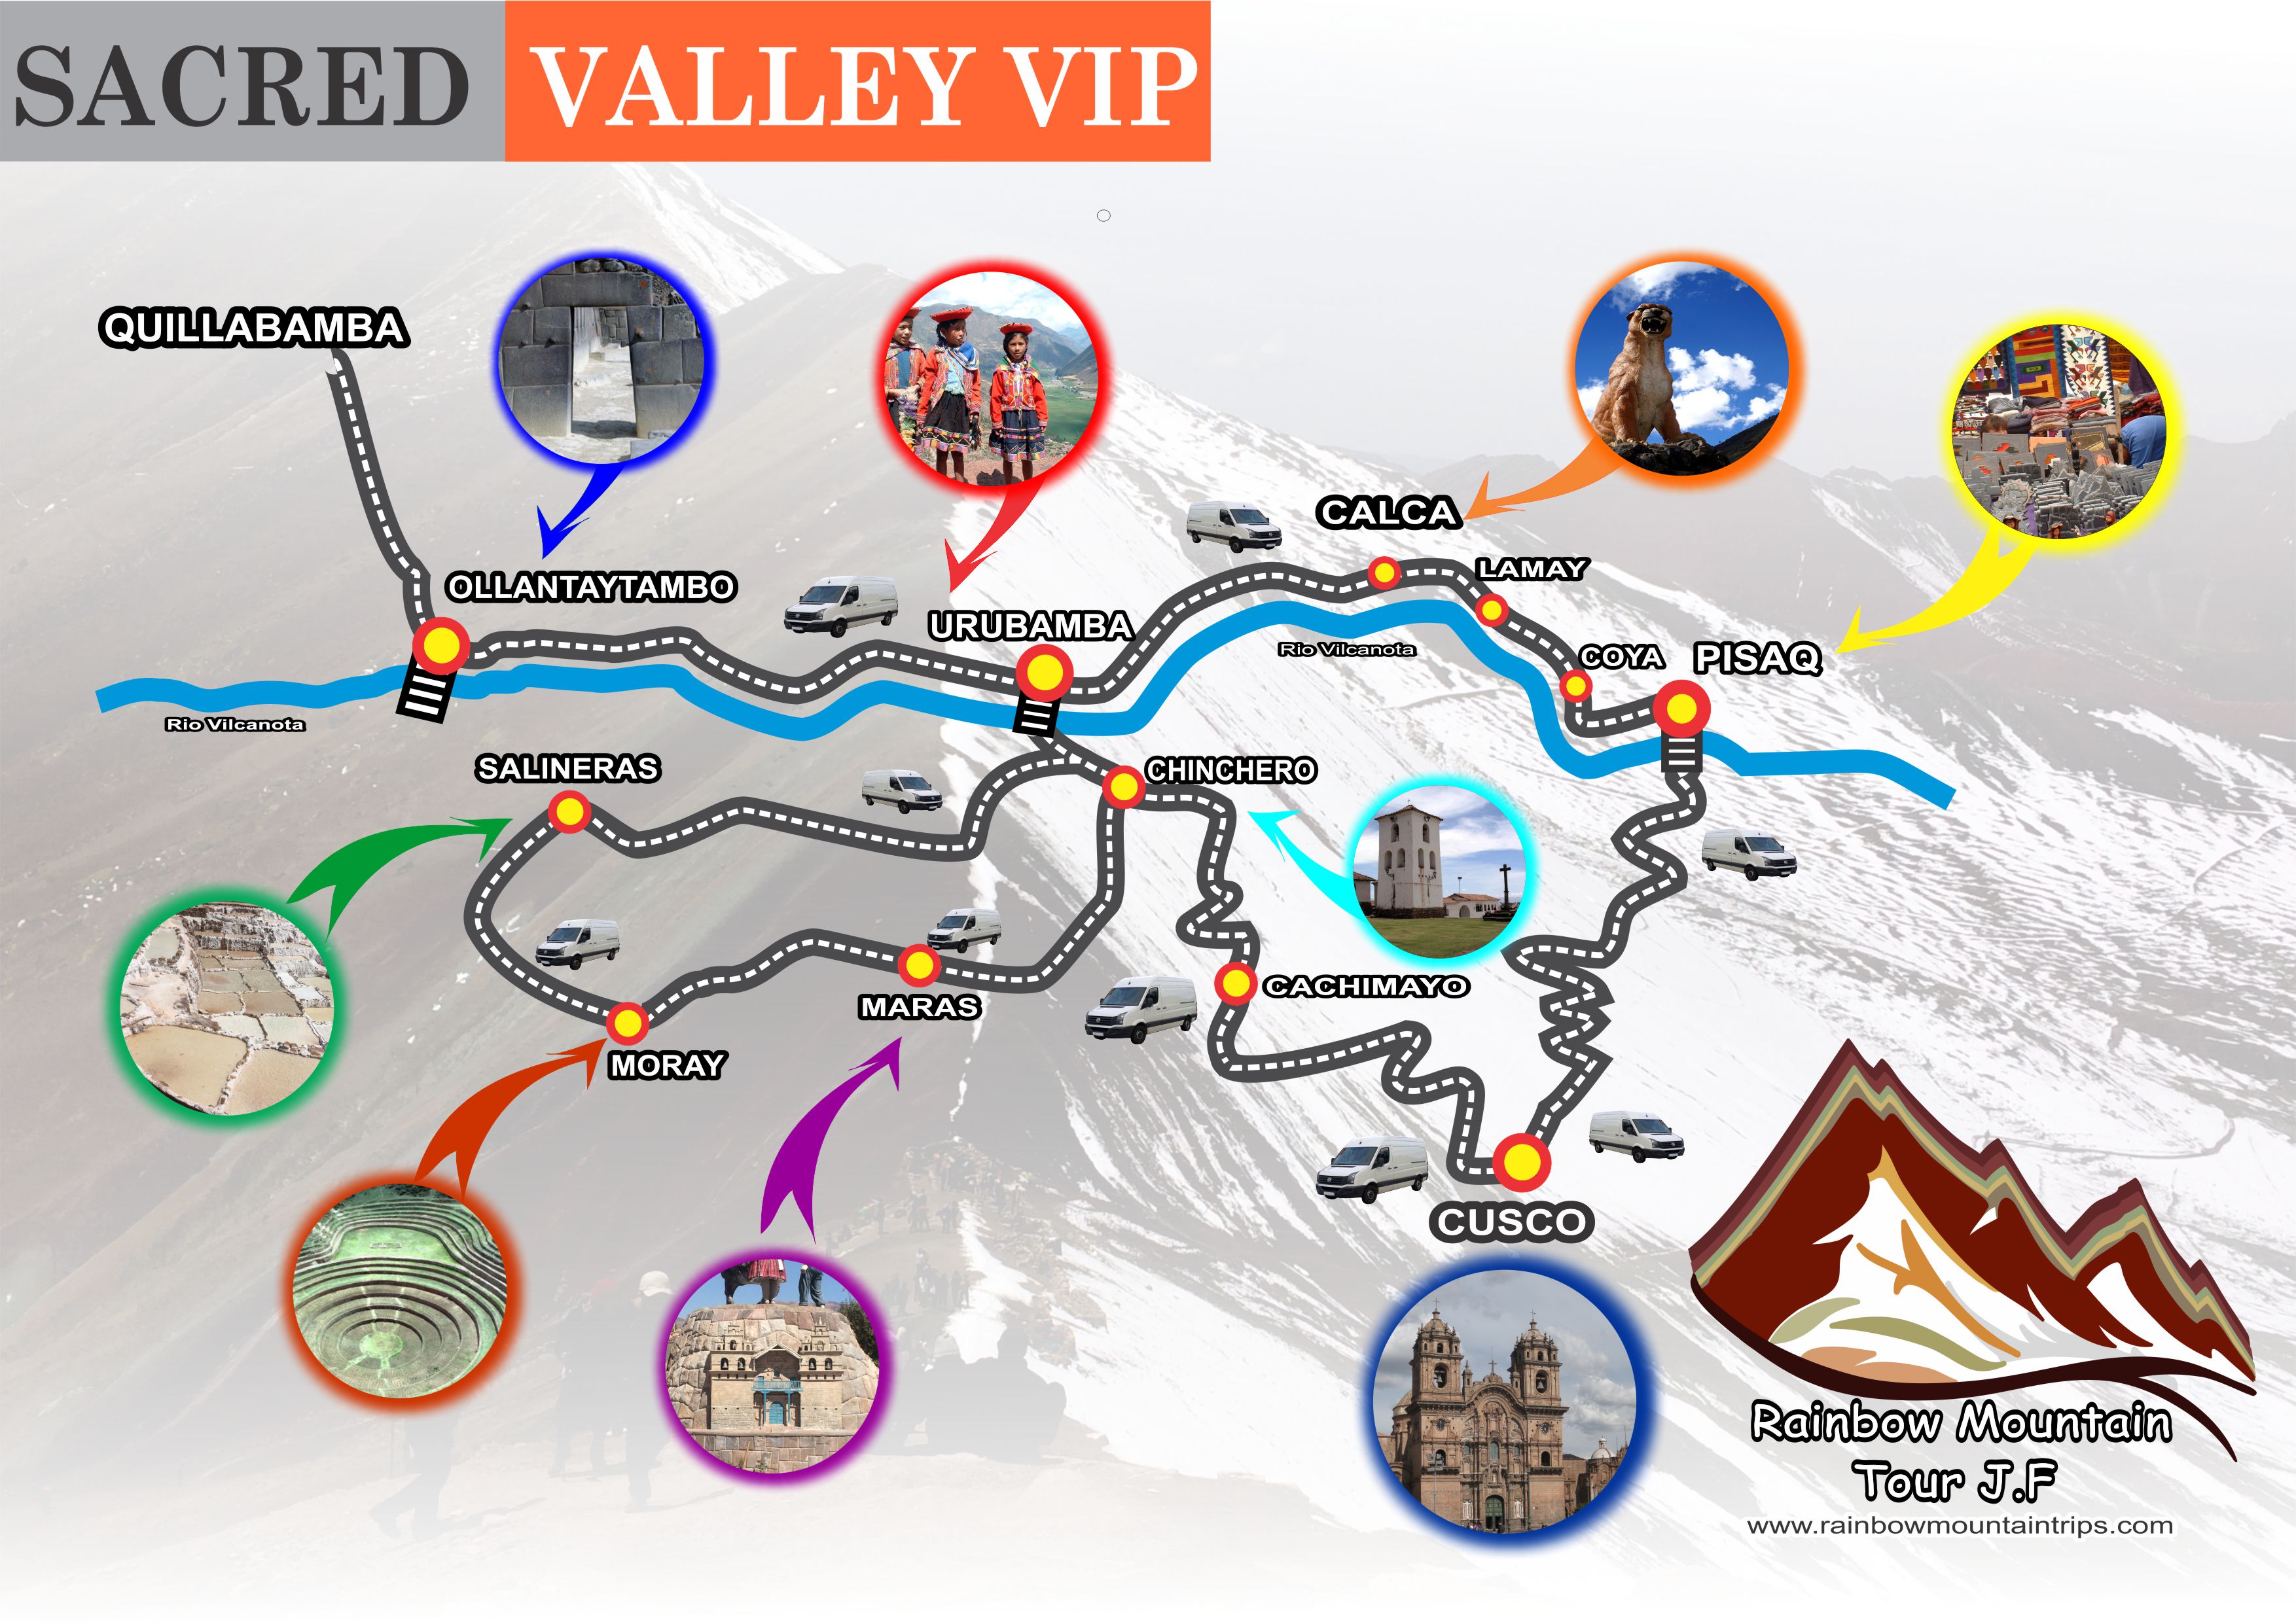 Sacred Valley Vip map